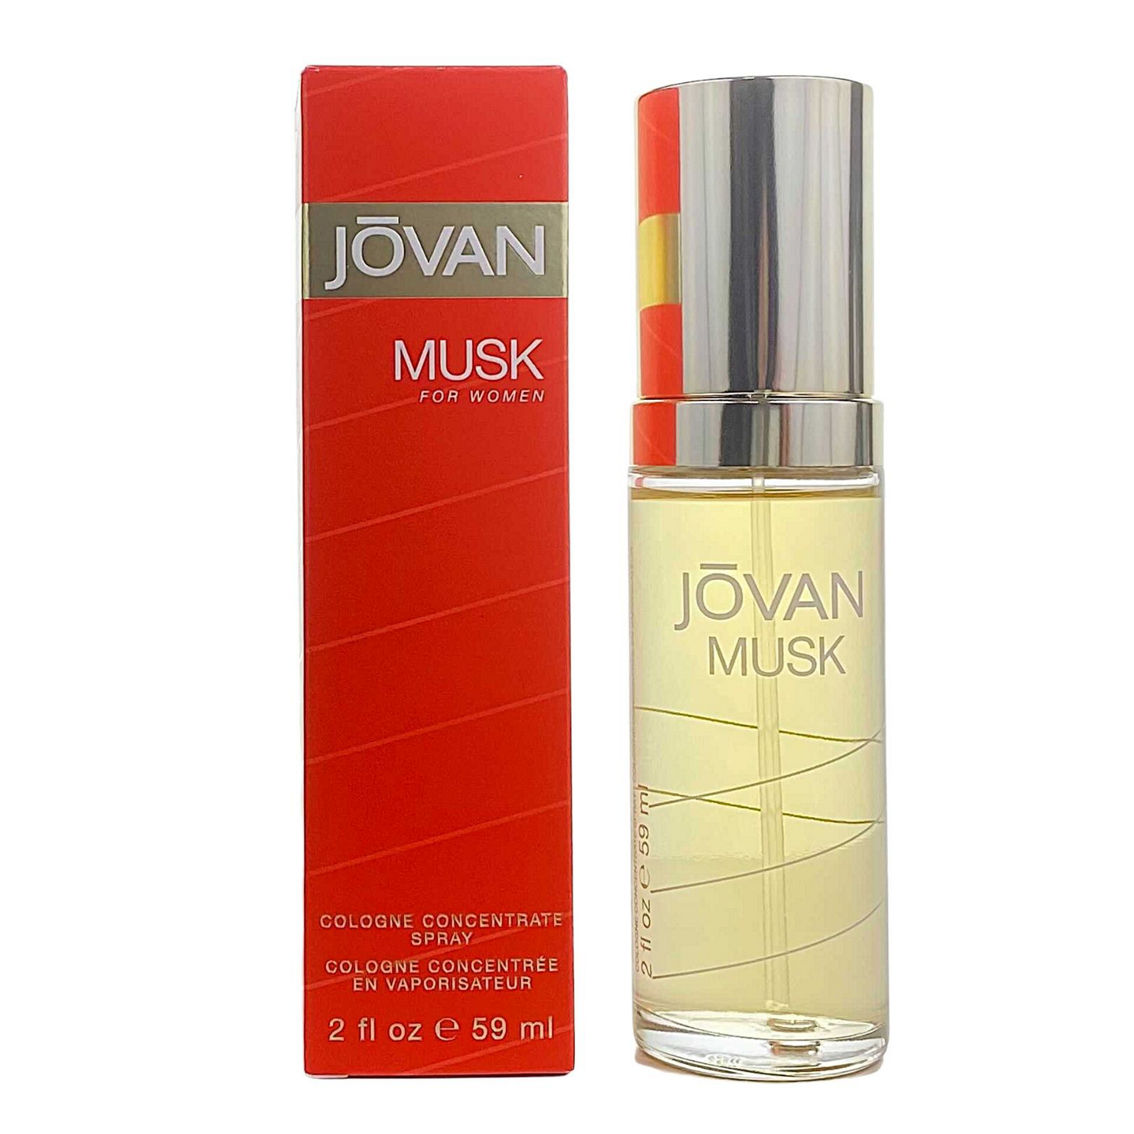 Coty Jovan Musk Cologne for Women - Image 2 of 2